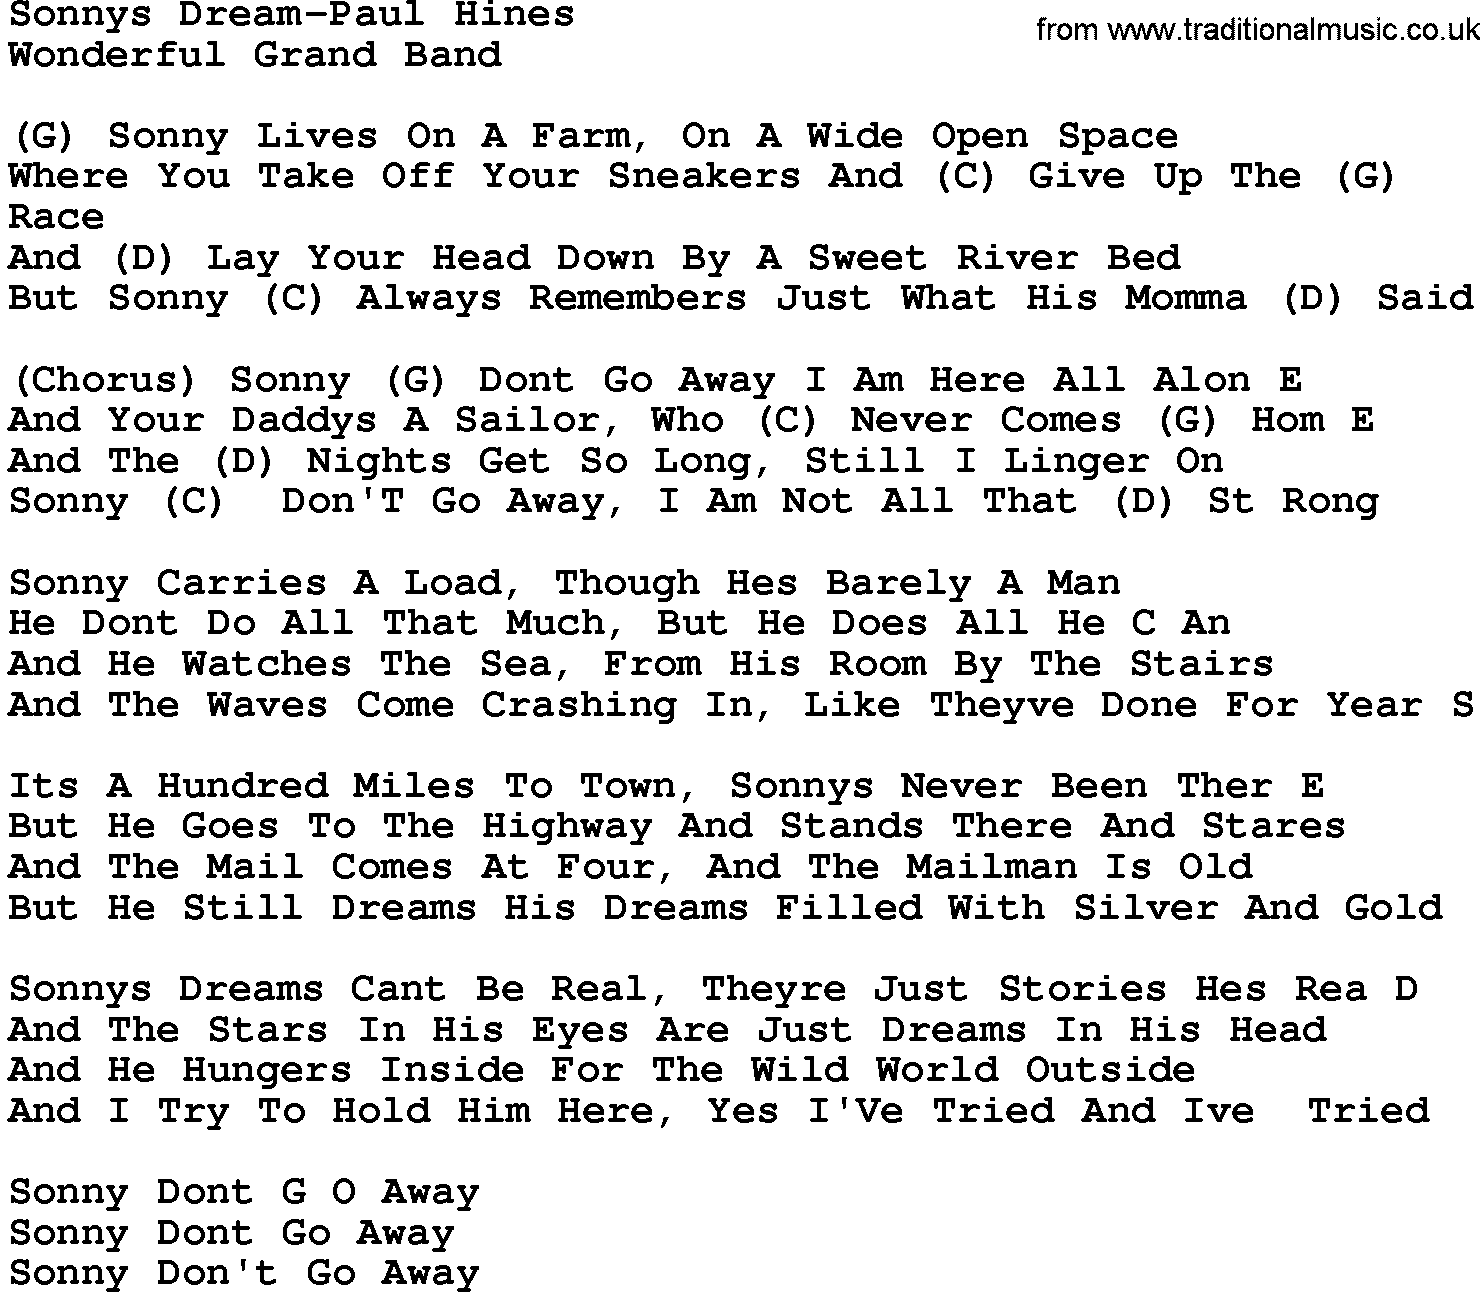 Country music song: Sonnys Dream-Paul Hines lyrics and chords